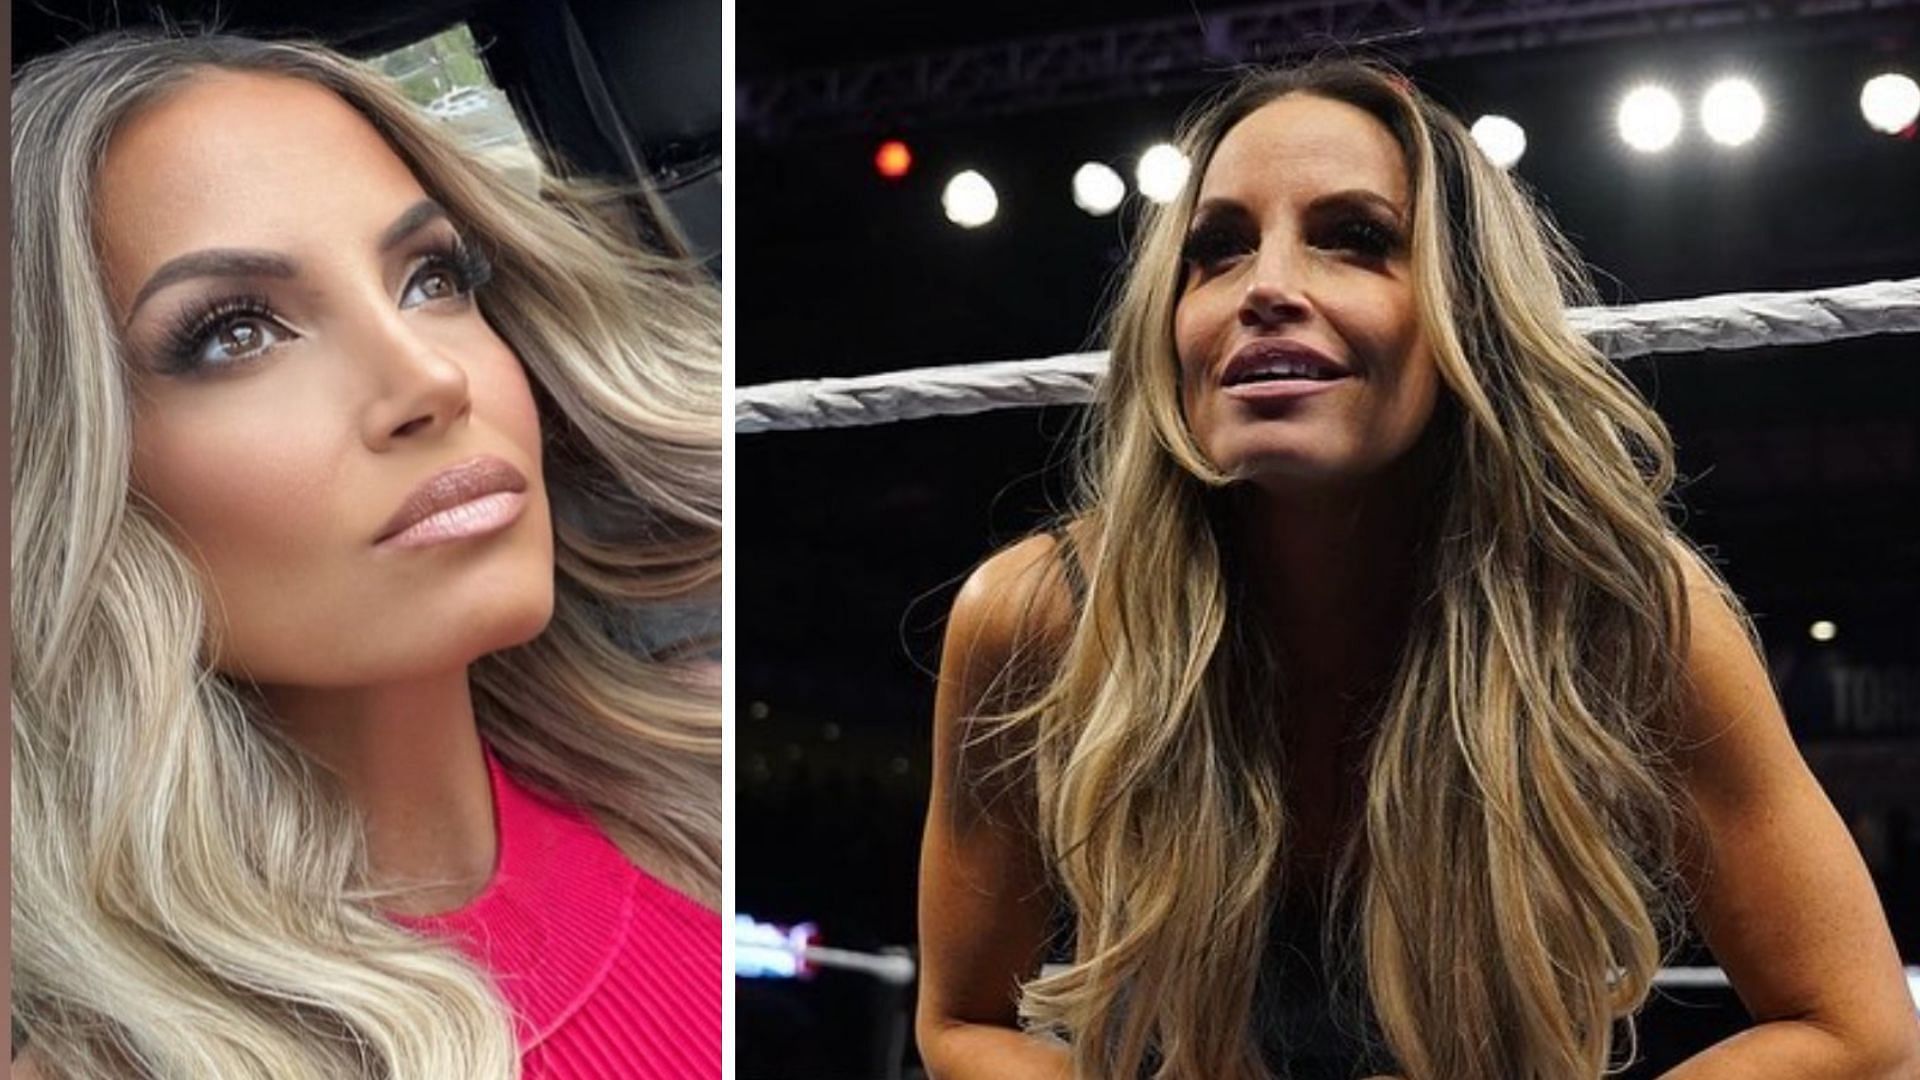 Trish Stratus will be in action tomorrow night on RAW.